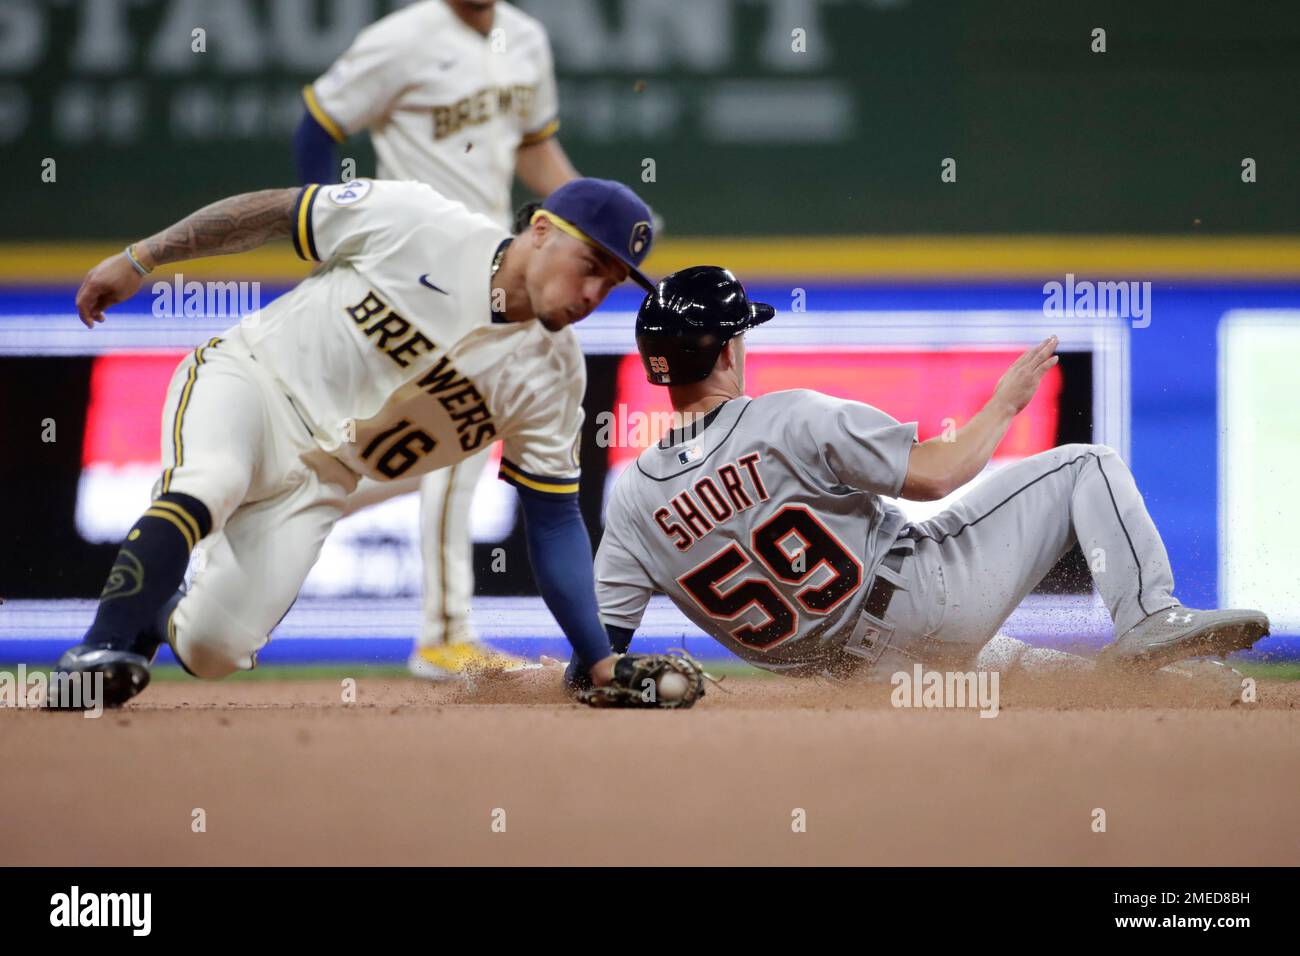 Zack Short (59) second base past the tag of Milwaukee Brewers' Kolten Wong